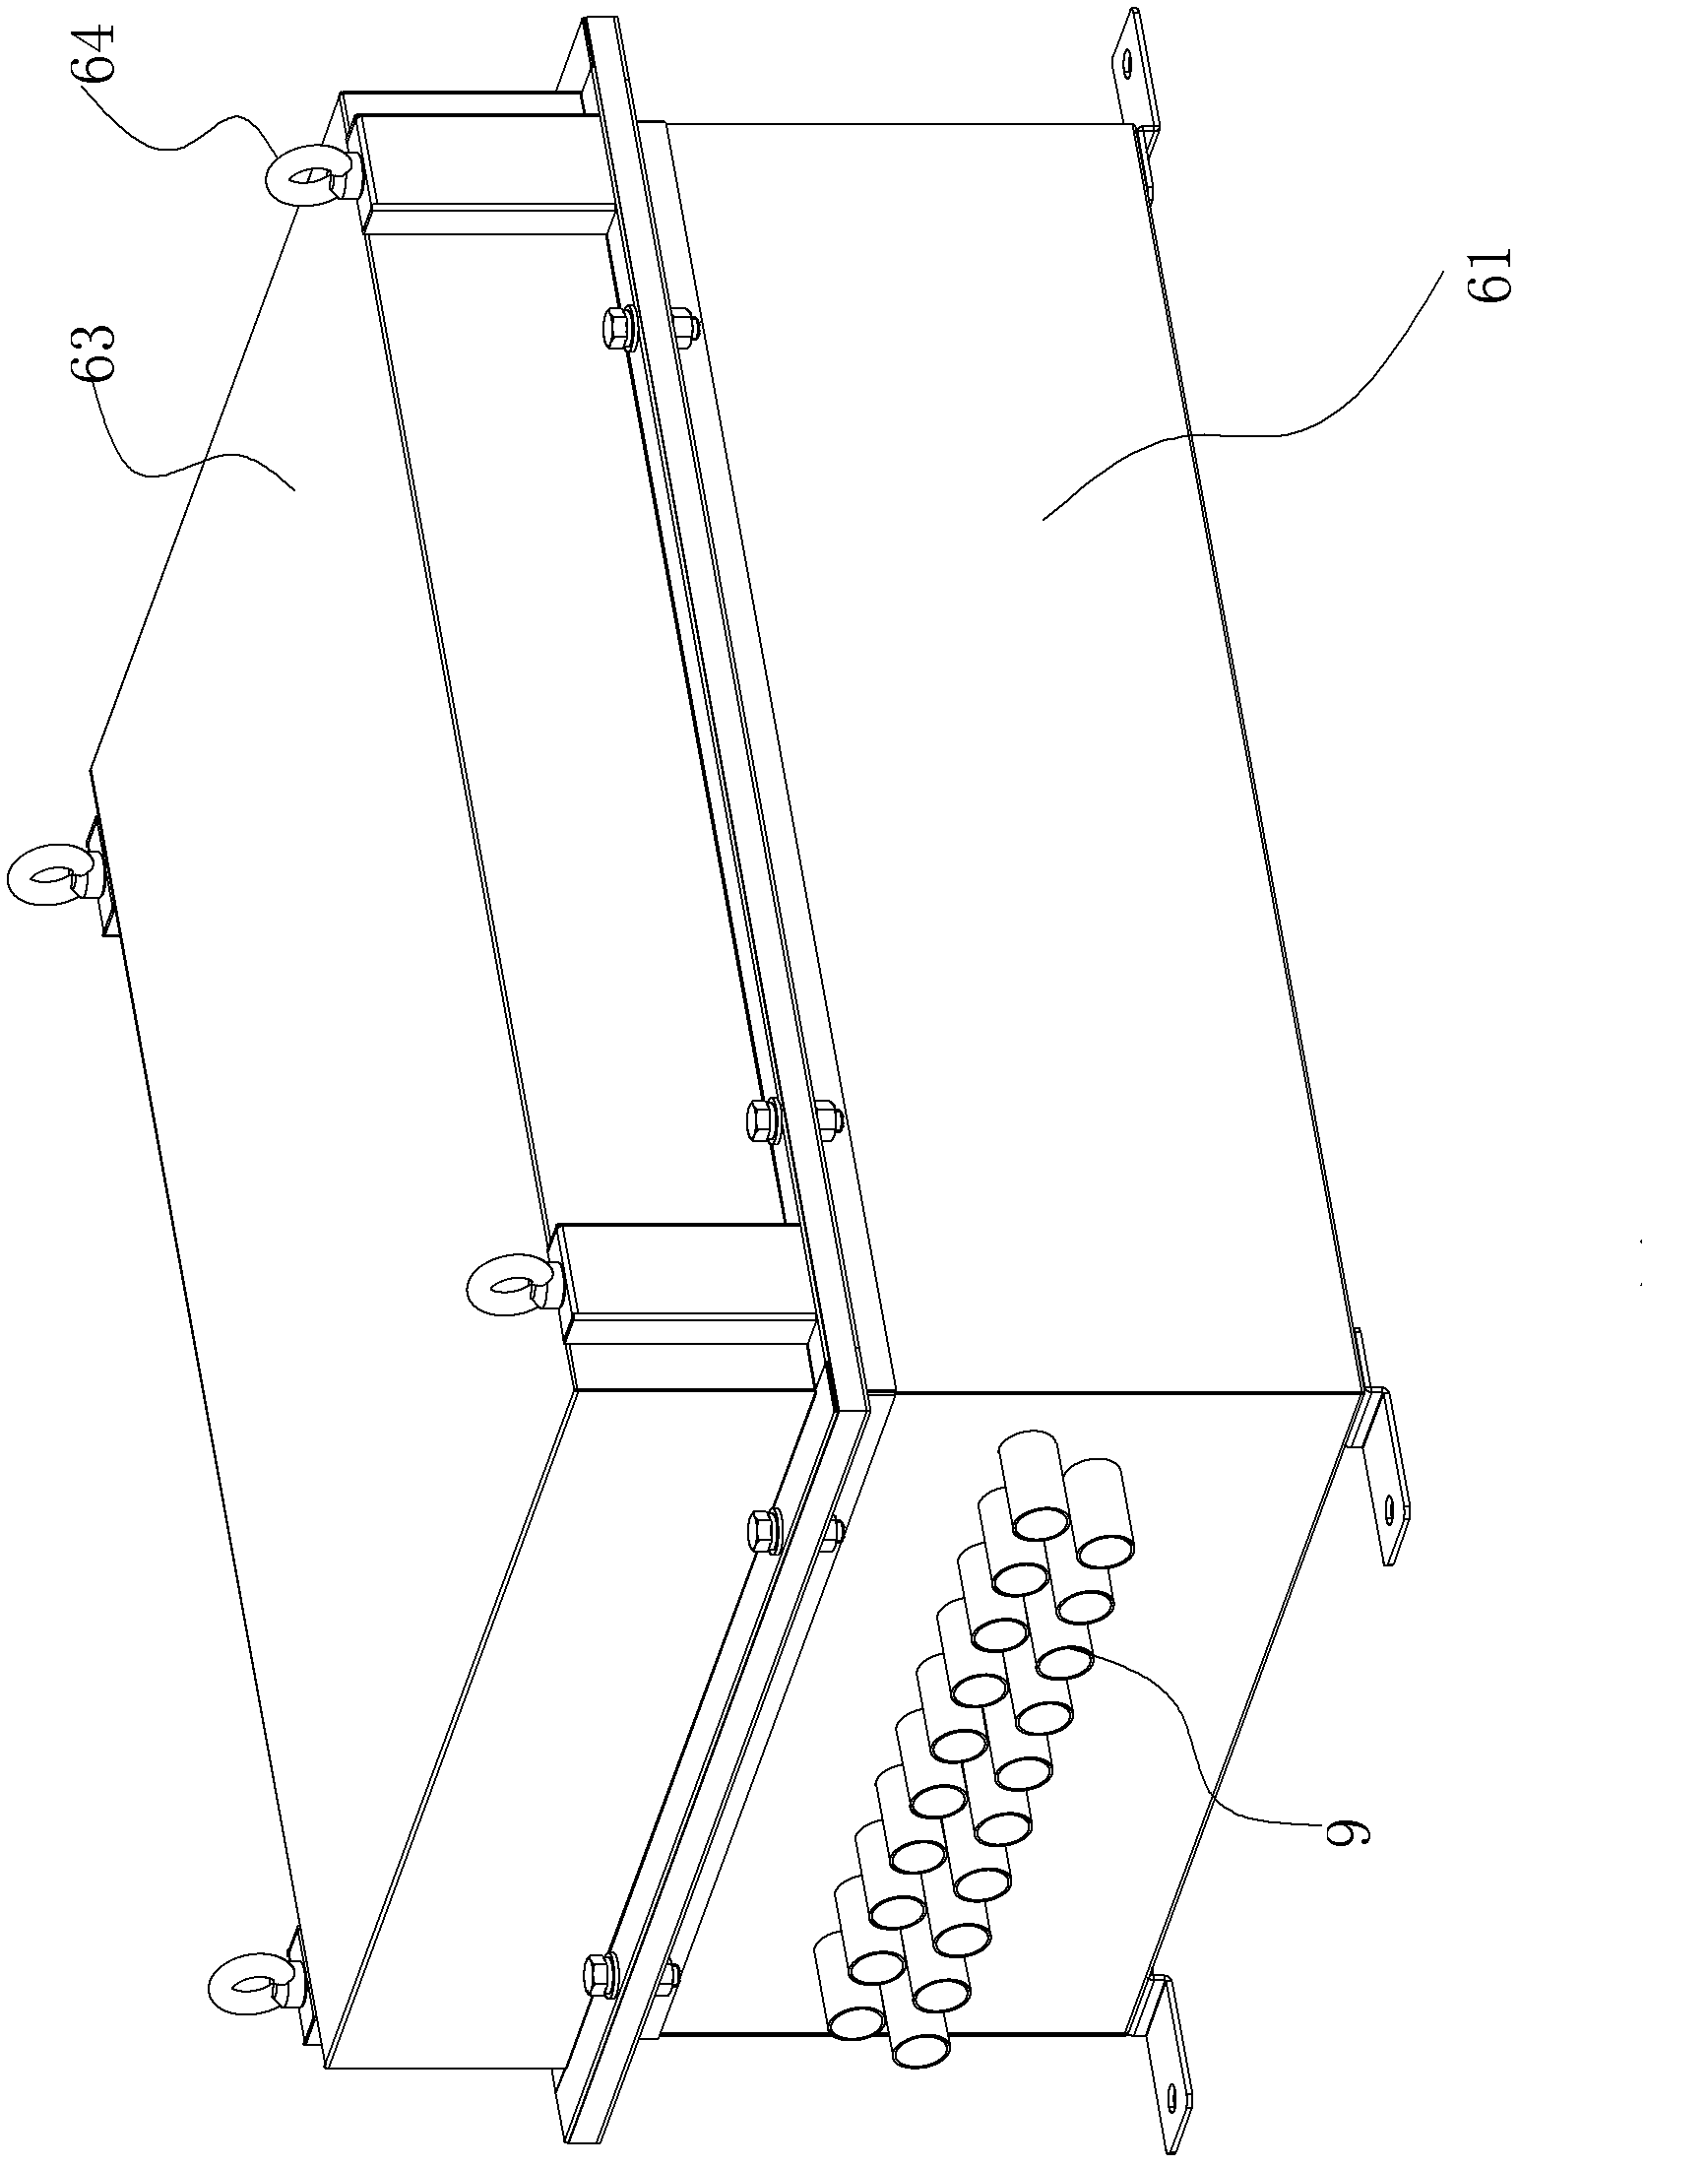 Direct-embedded electronic equipment protection device and direct-embedded optical-cable communication access equipment